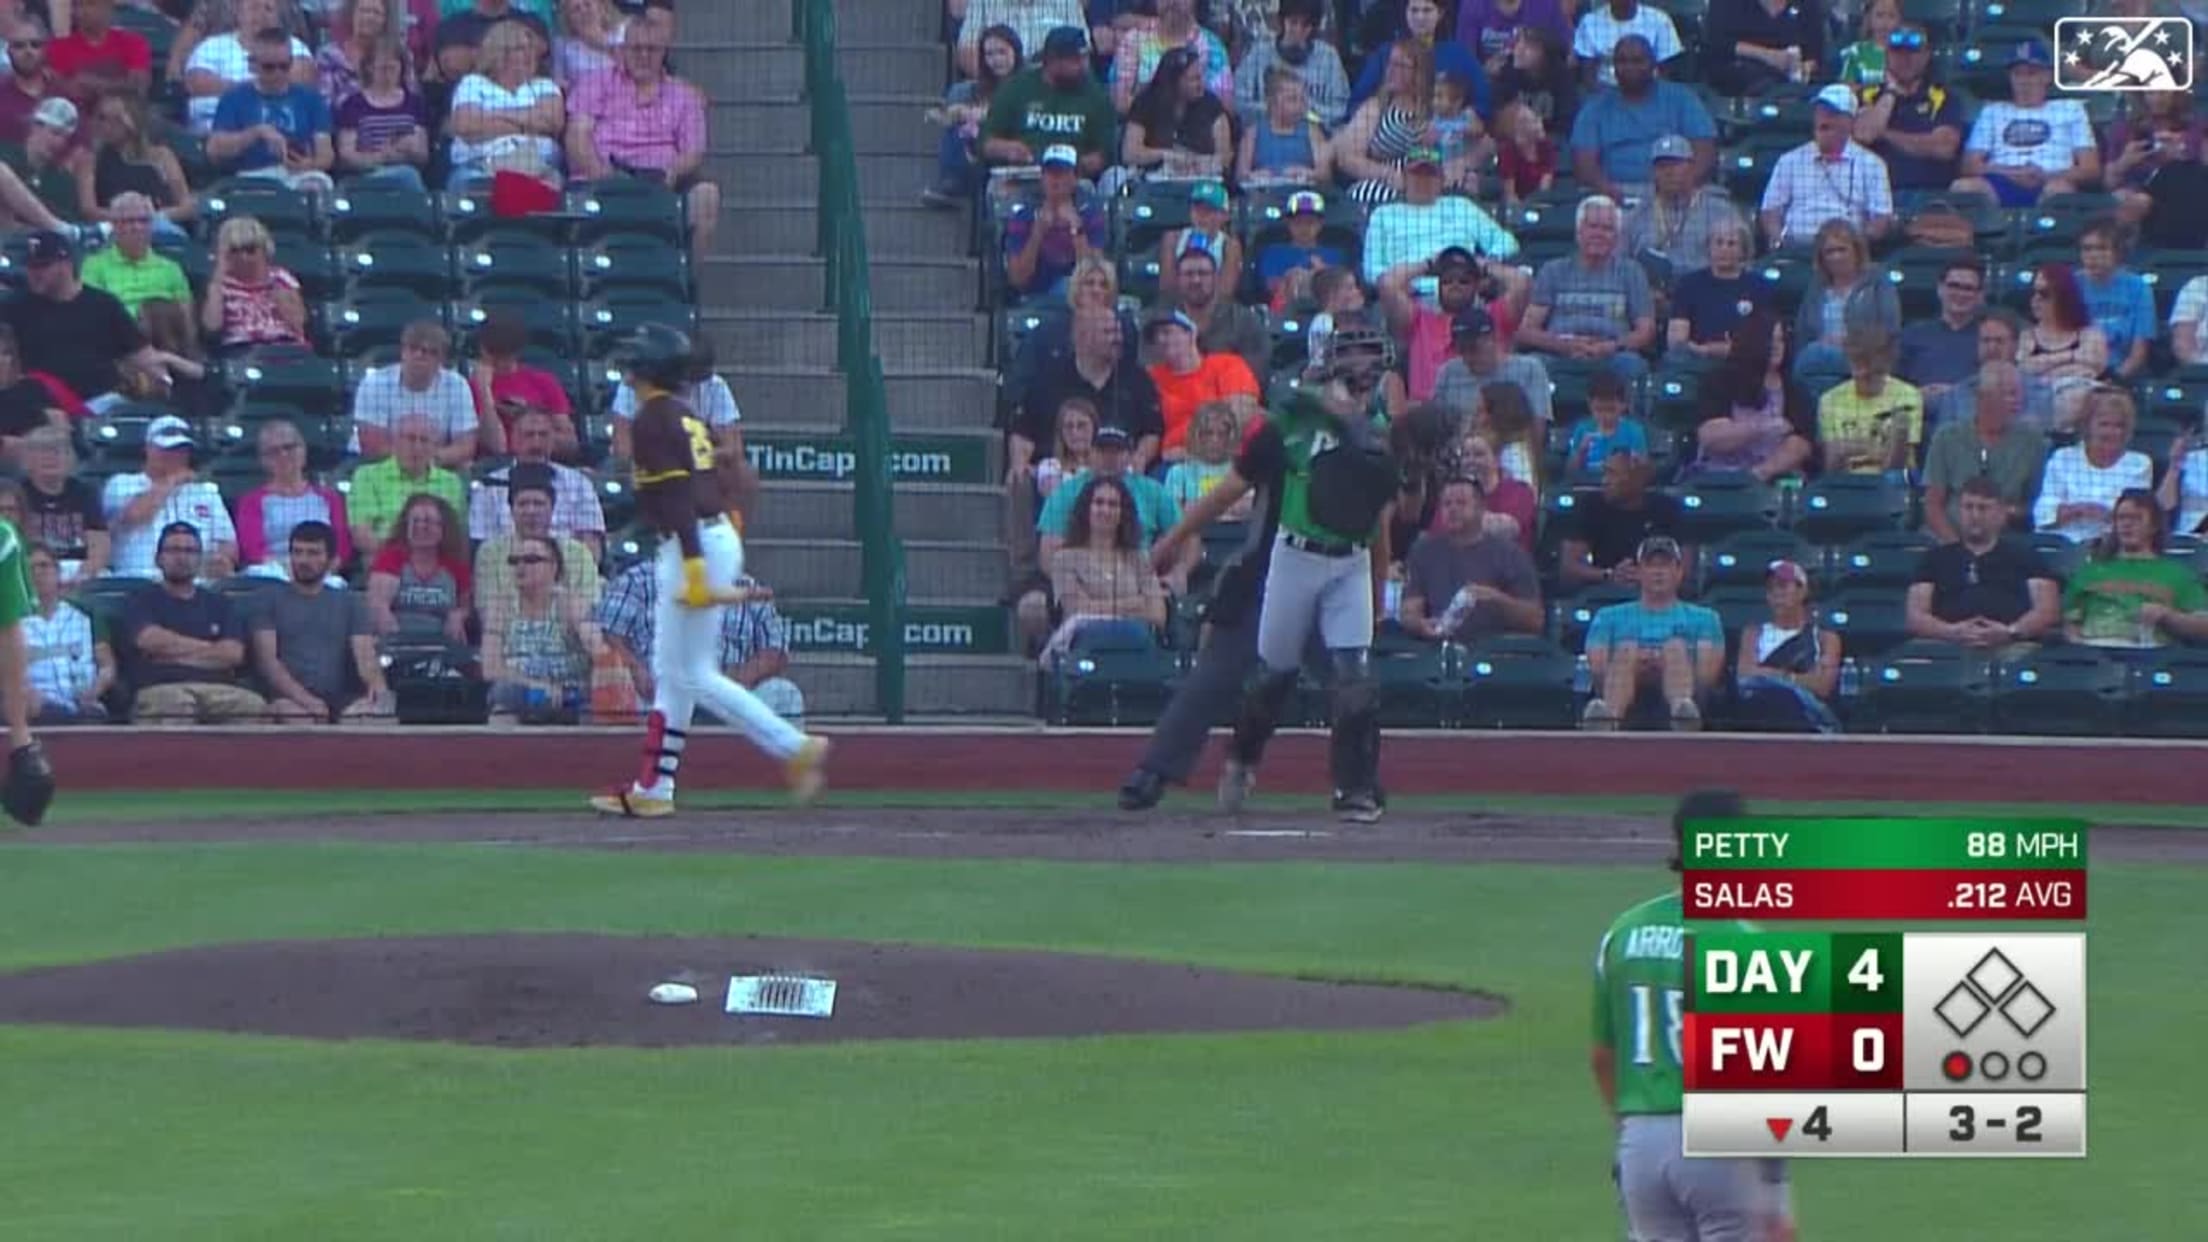 Chase Petty's second strikeout